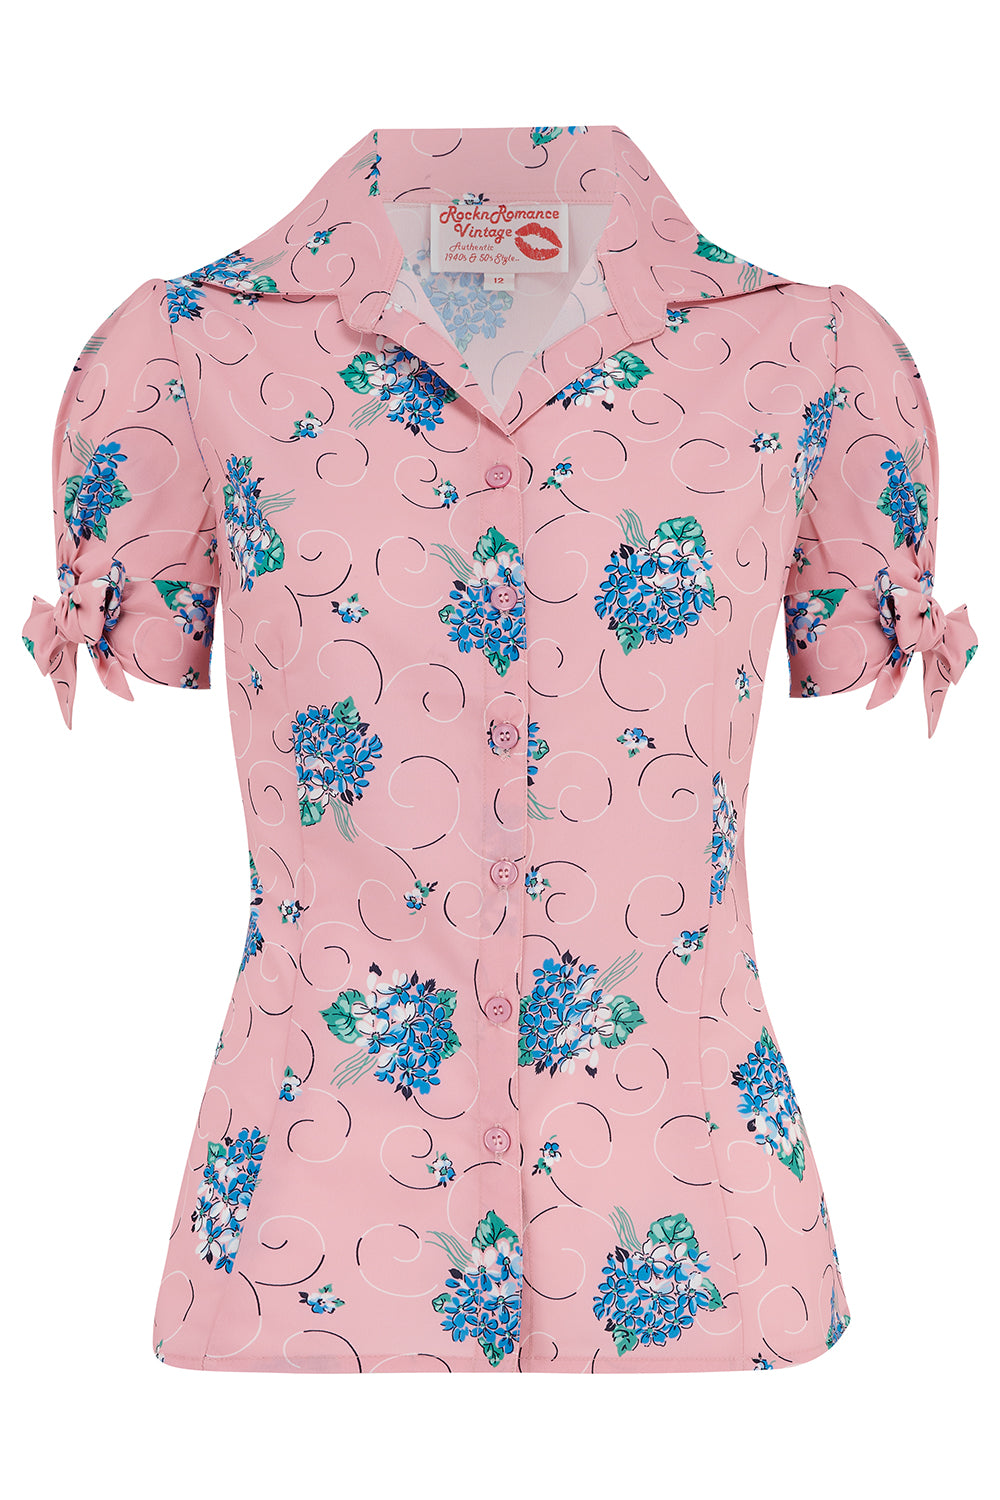 The "Jane" Blouse in Pink Summer Bouquet, True & Authentic 1950s Vintage Style